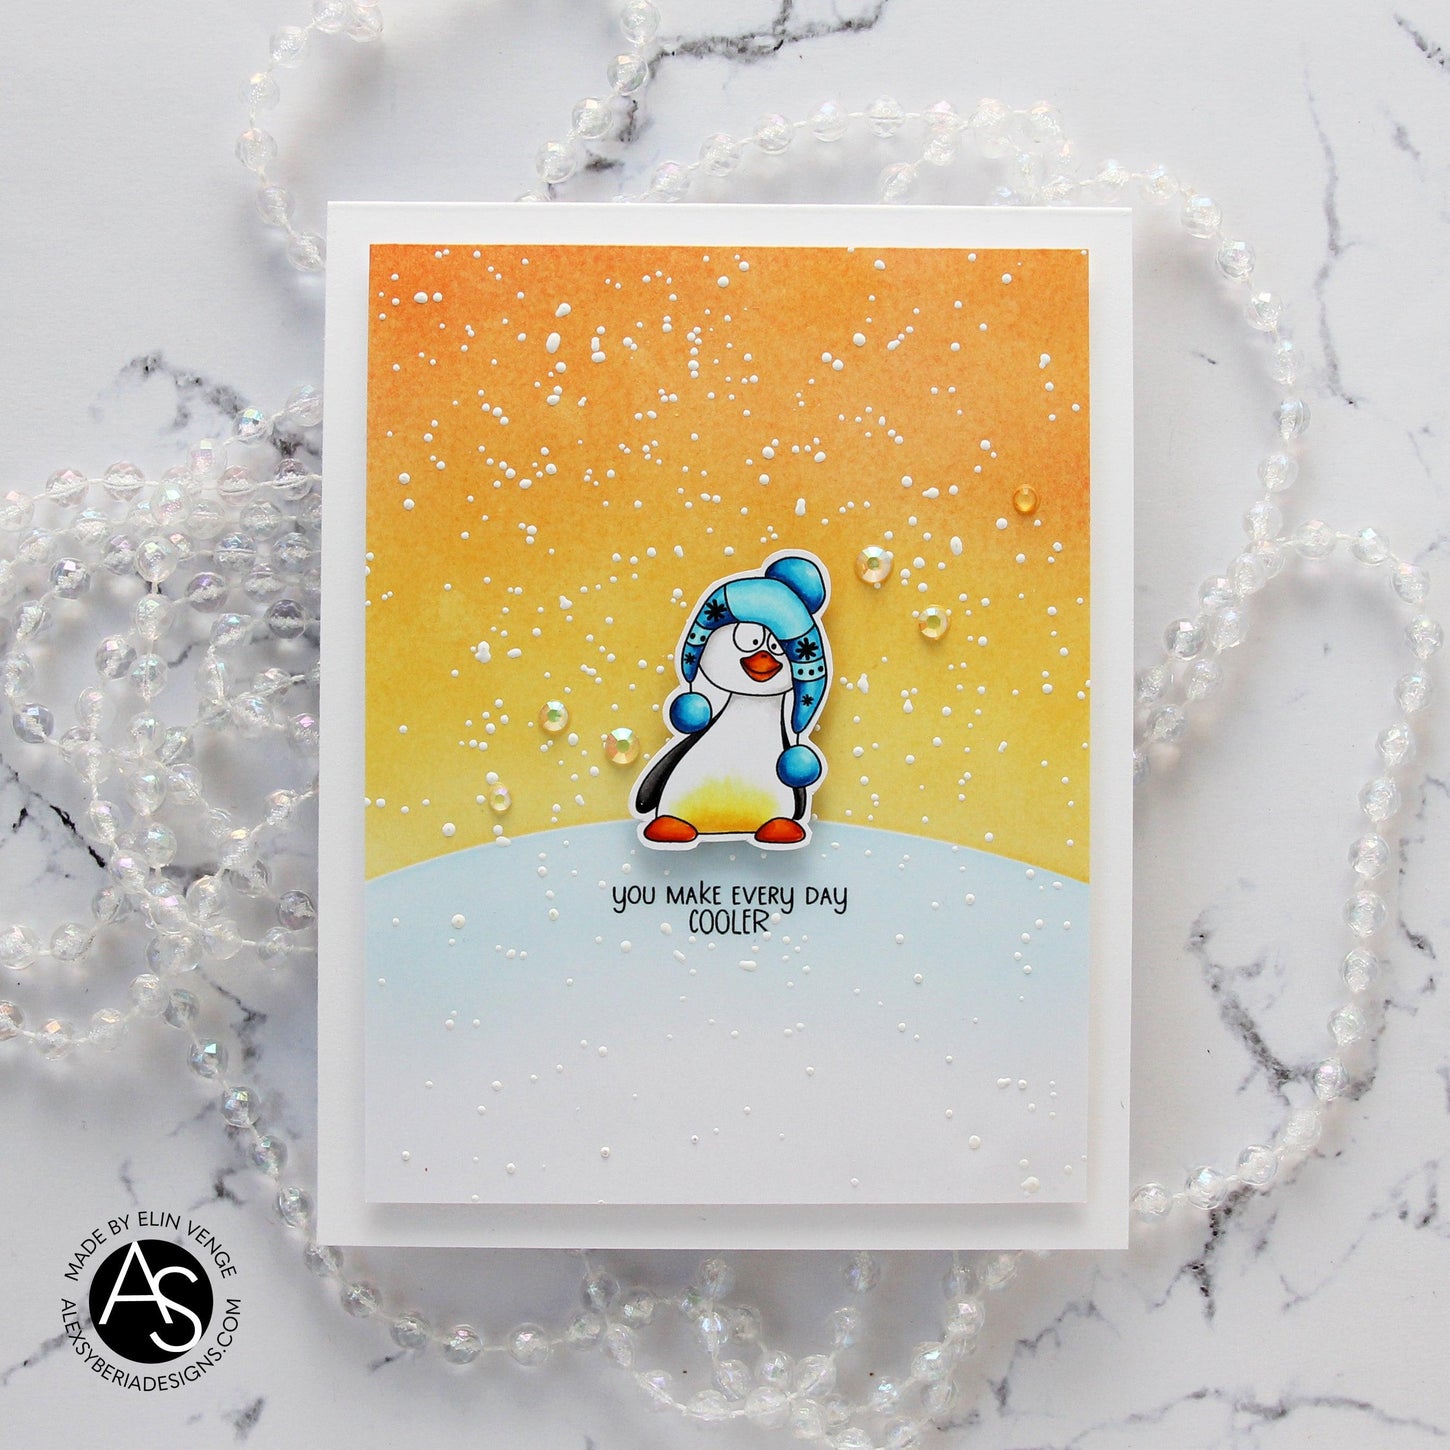 smile-and-wave-stamp-die-set-penguins-star-cardmaking-christmas-cards-winter-stamps-sending-hug-cardmaking-ideas-clean-and-simple-cards-simon-say-stamp-products